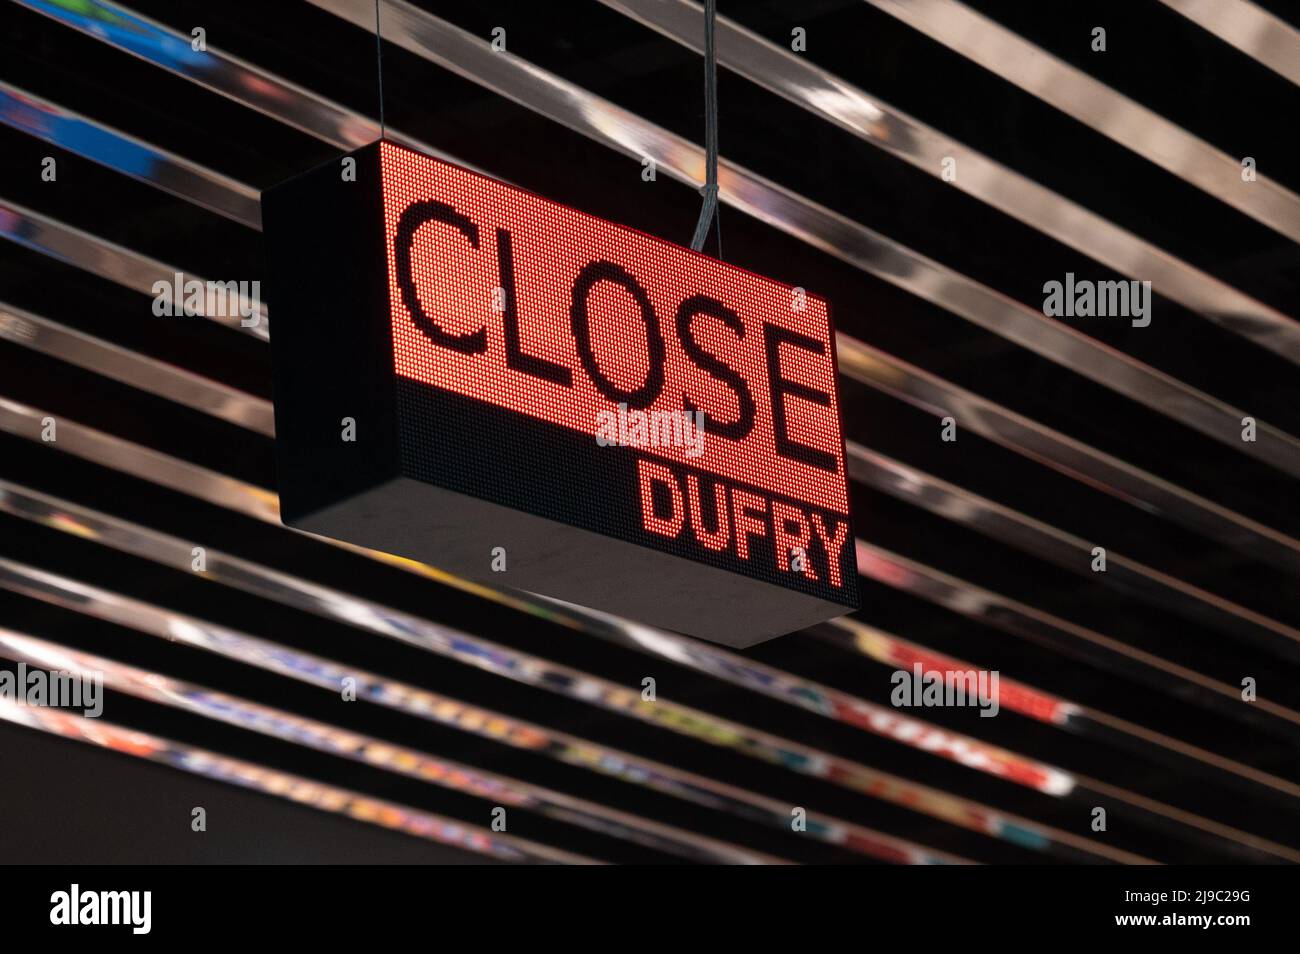 Istanbul, Turkey - January, 2022: Dufry sign at International Airport Stock Photo